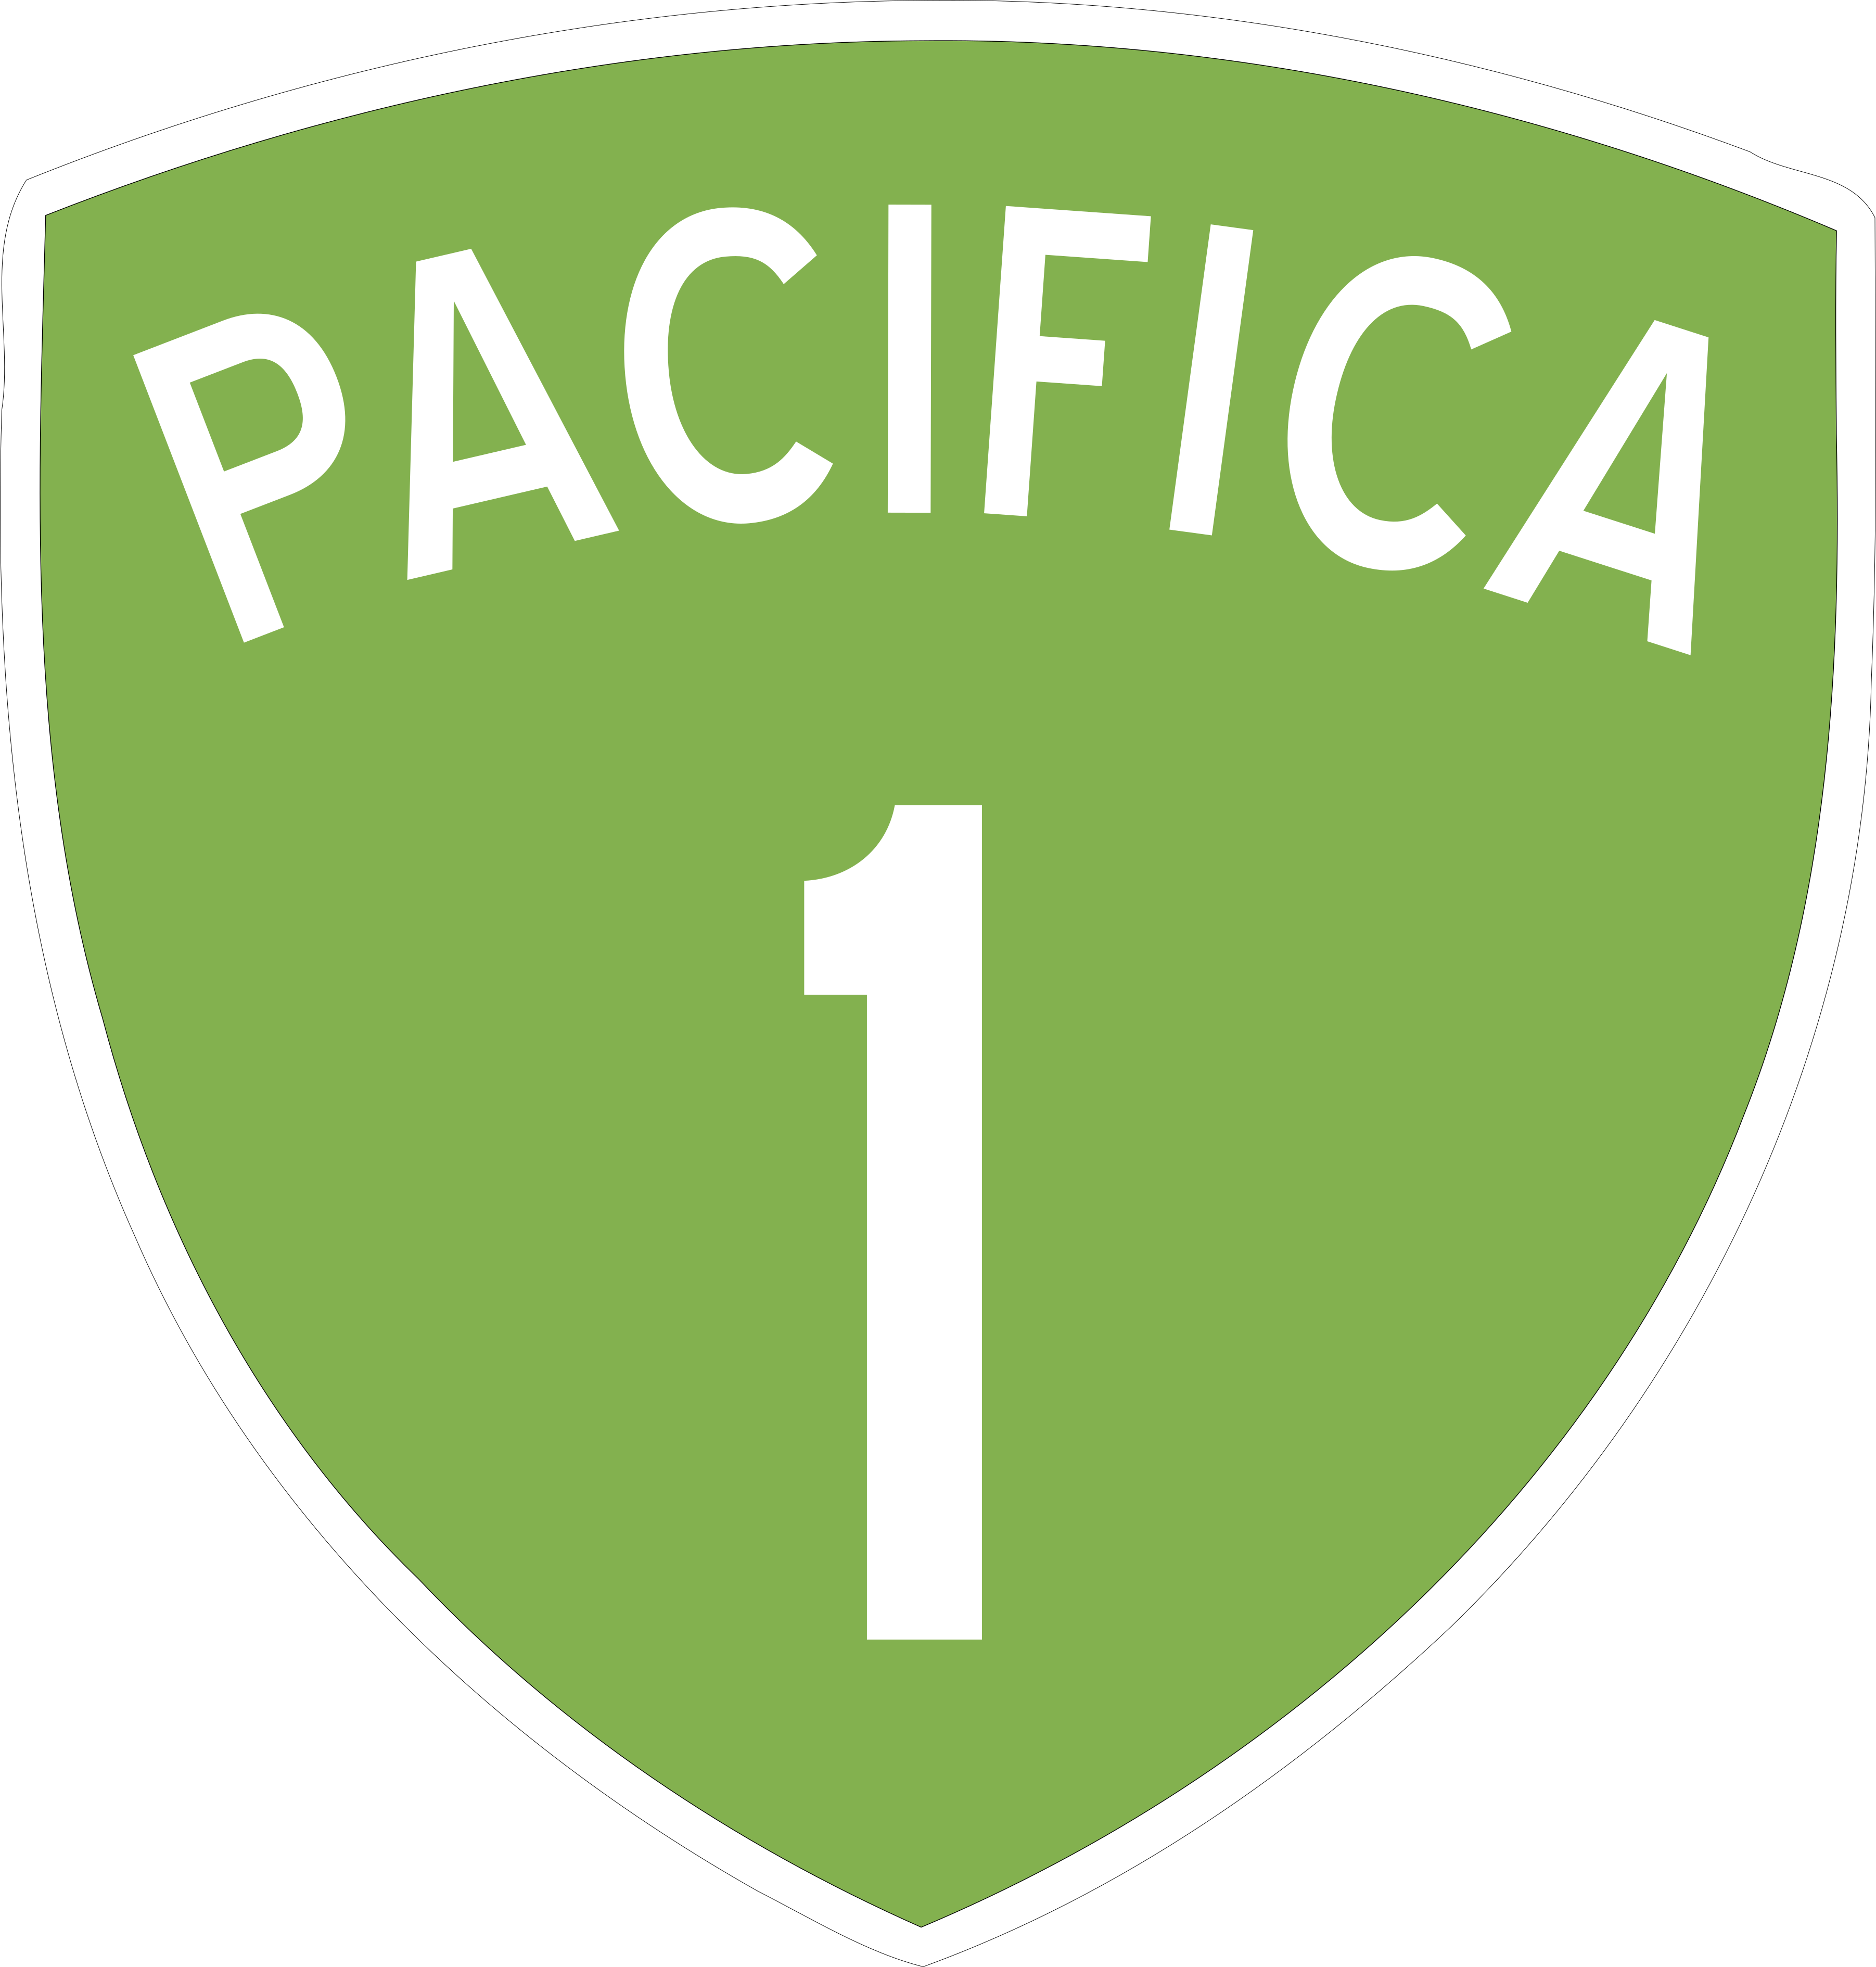 Today's Daily Create: Design your own road sign. Travel in peace from Tierra del Fuego to Invercargill.